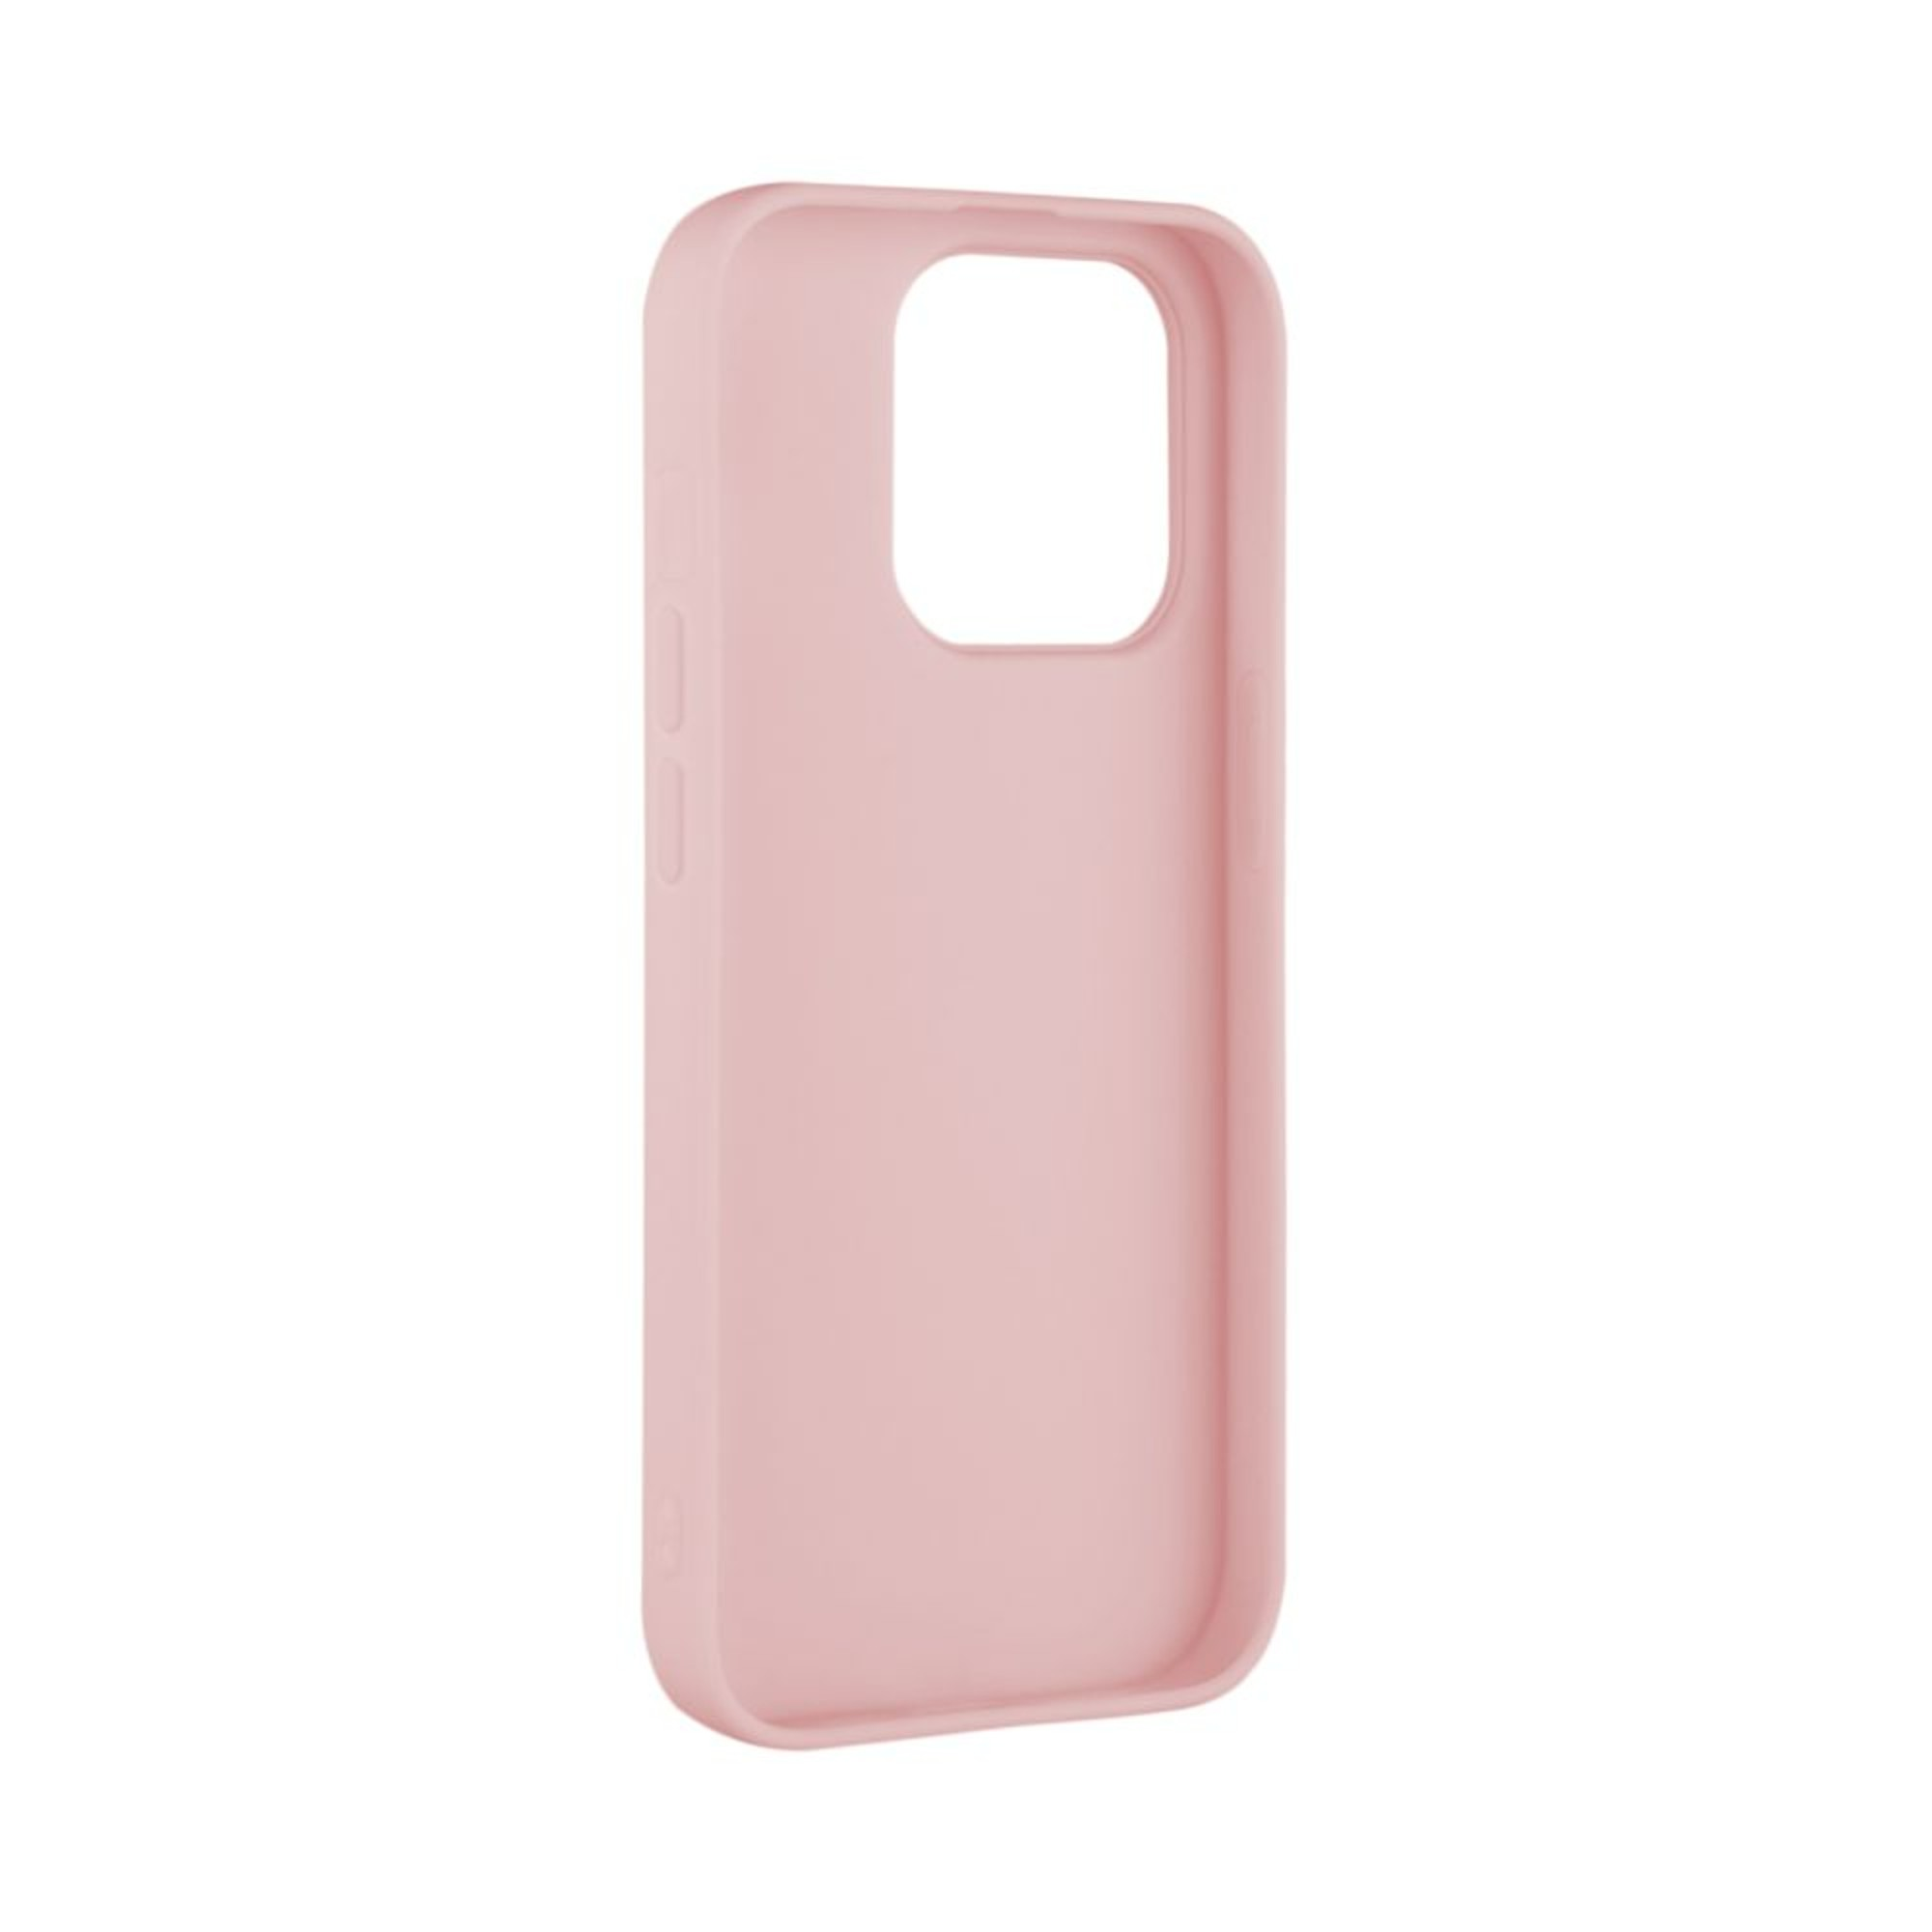 iPhone Backcover, 14 Max, Pro FIXST-931-PK, Apple, FIXED Rosa